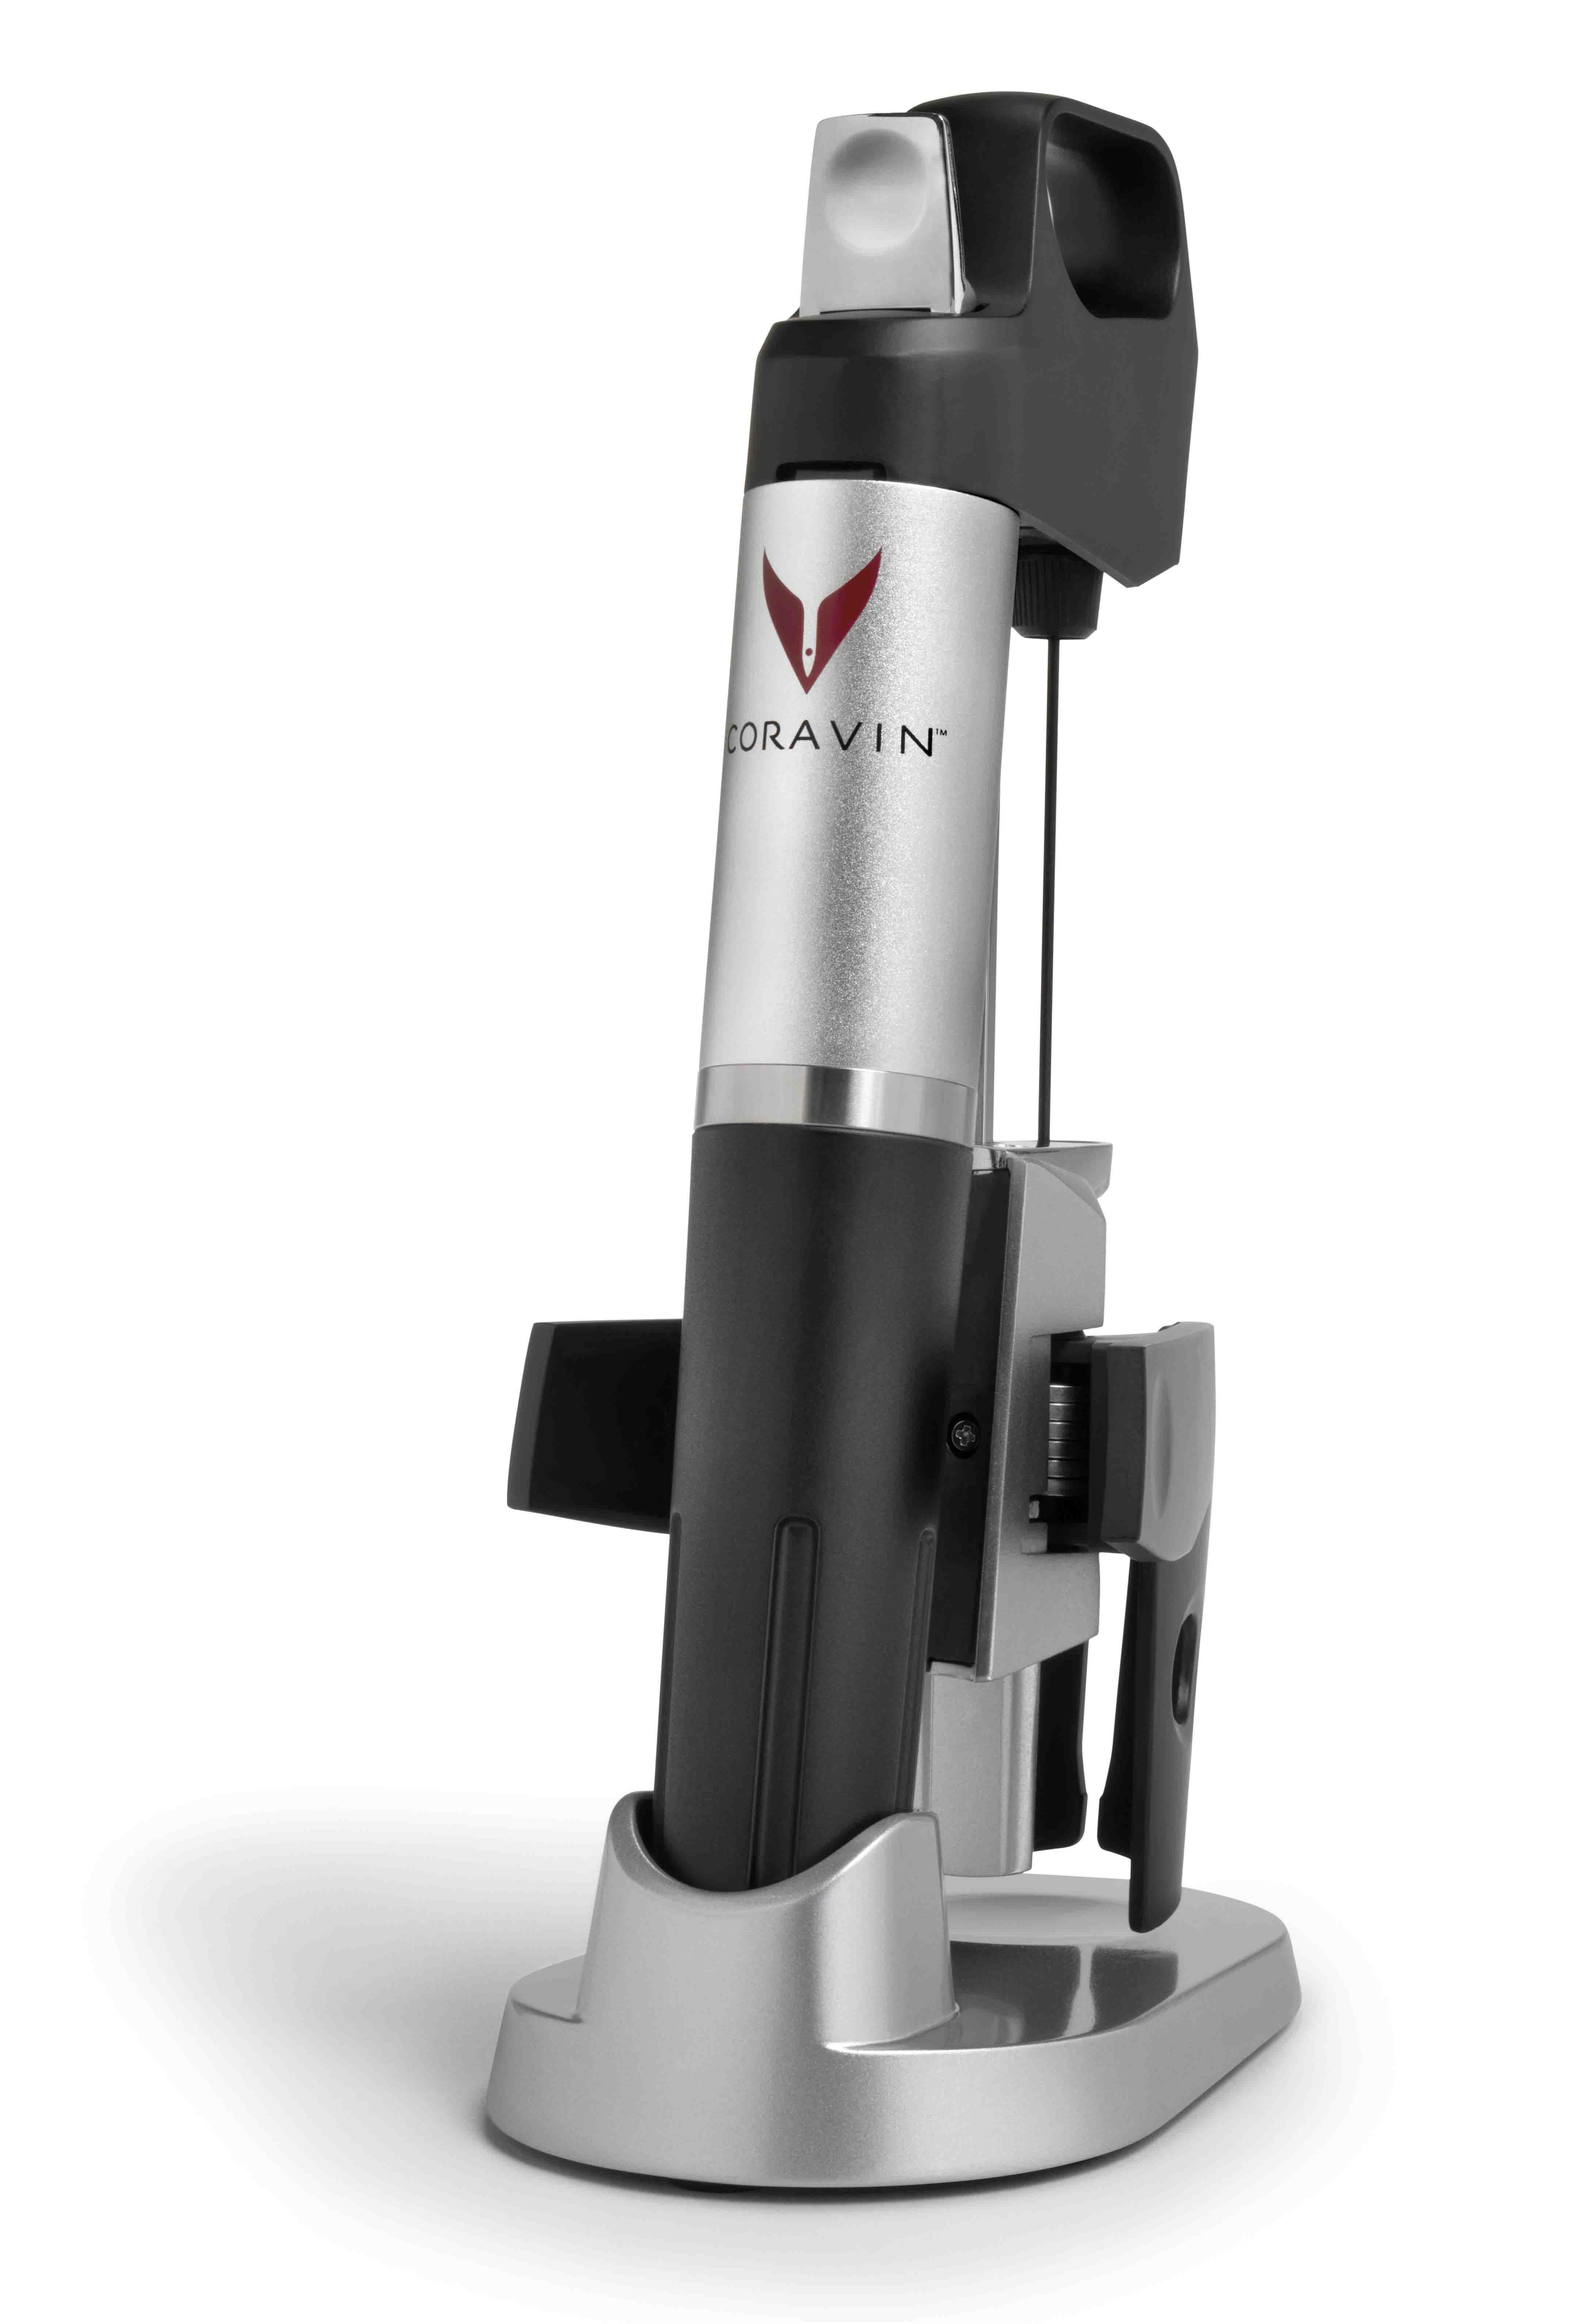 Coravin, The Ultimate Wine Access Device